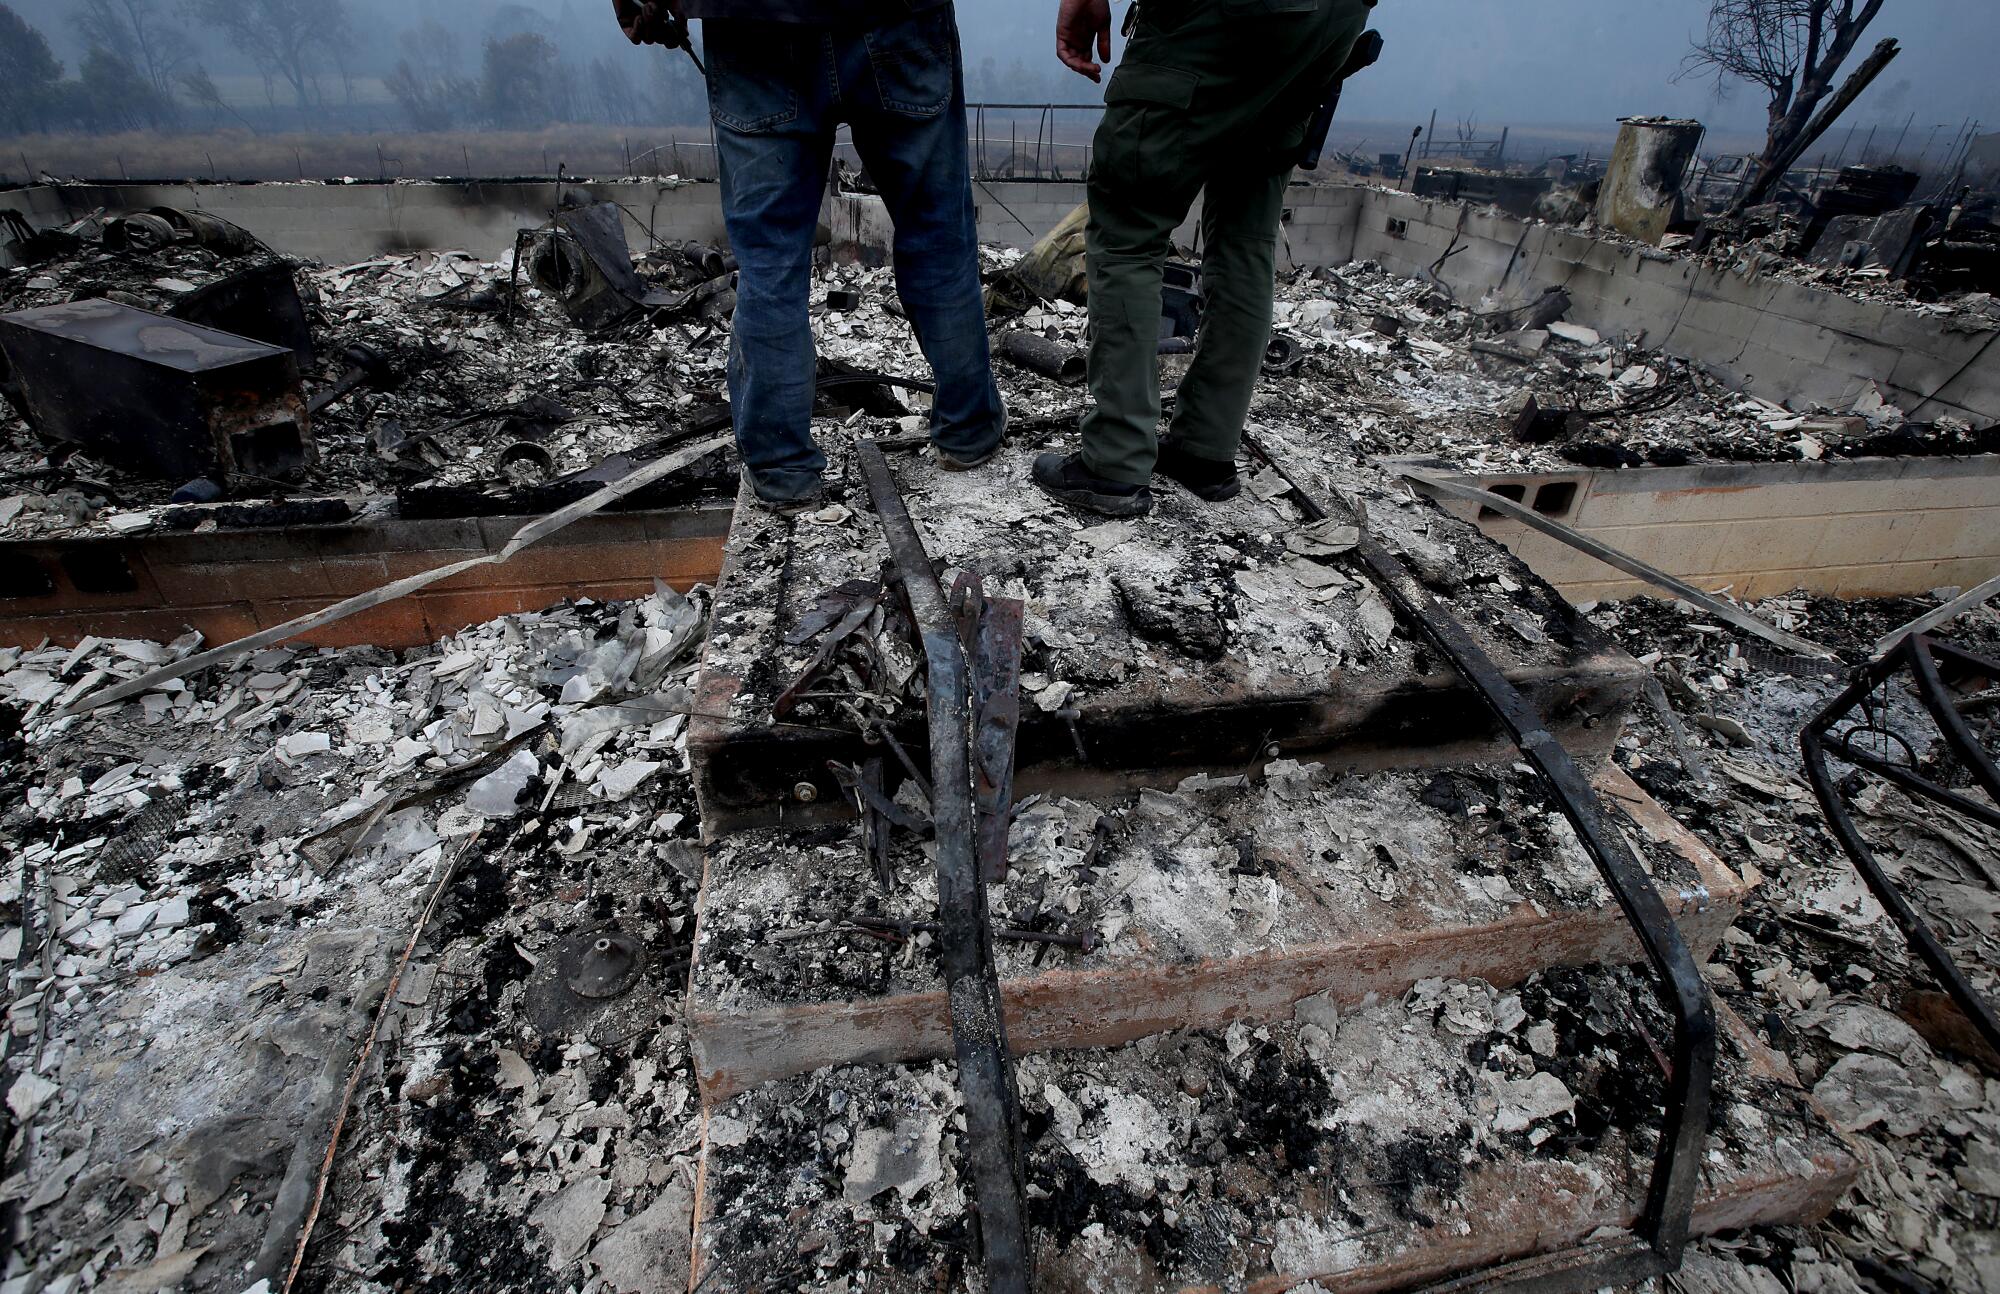 People look over a burned home in the Mckinney Fire near Yureka.